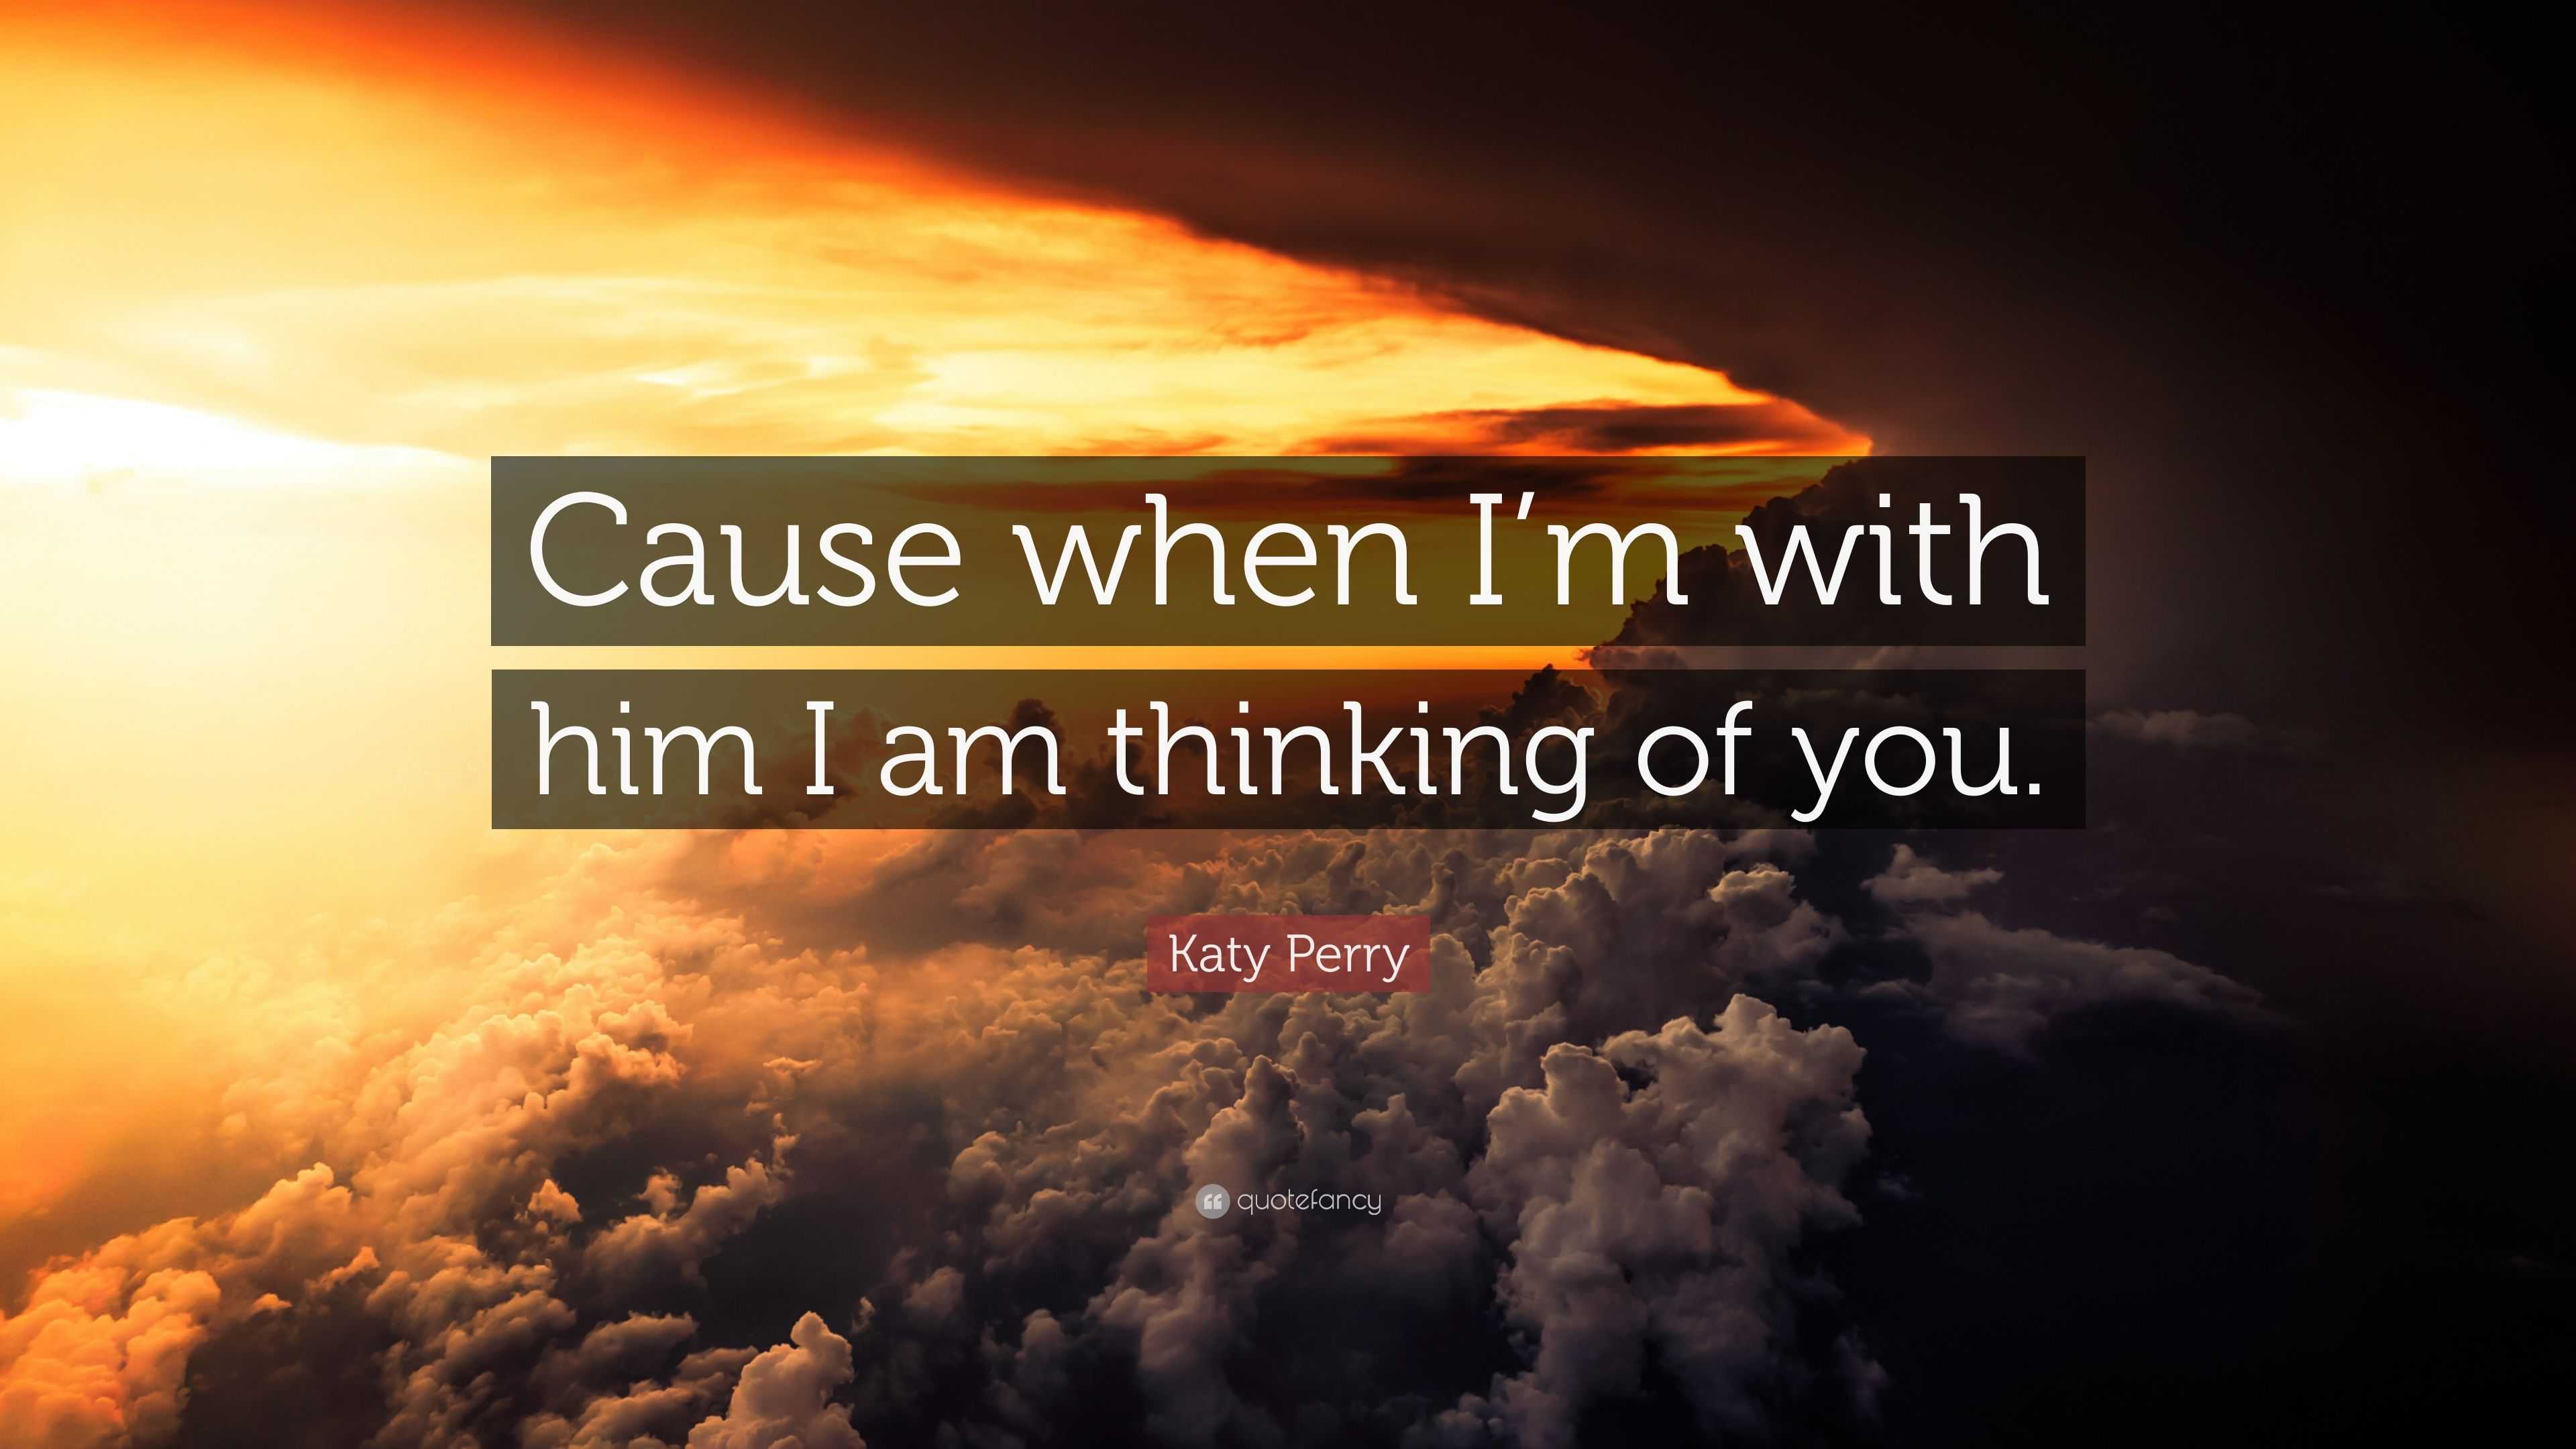 Katy Perry Quote “cause When Im With Him I Am Thinking Of You” 5965